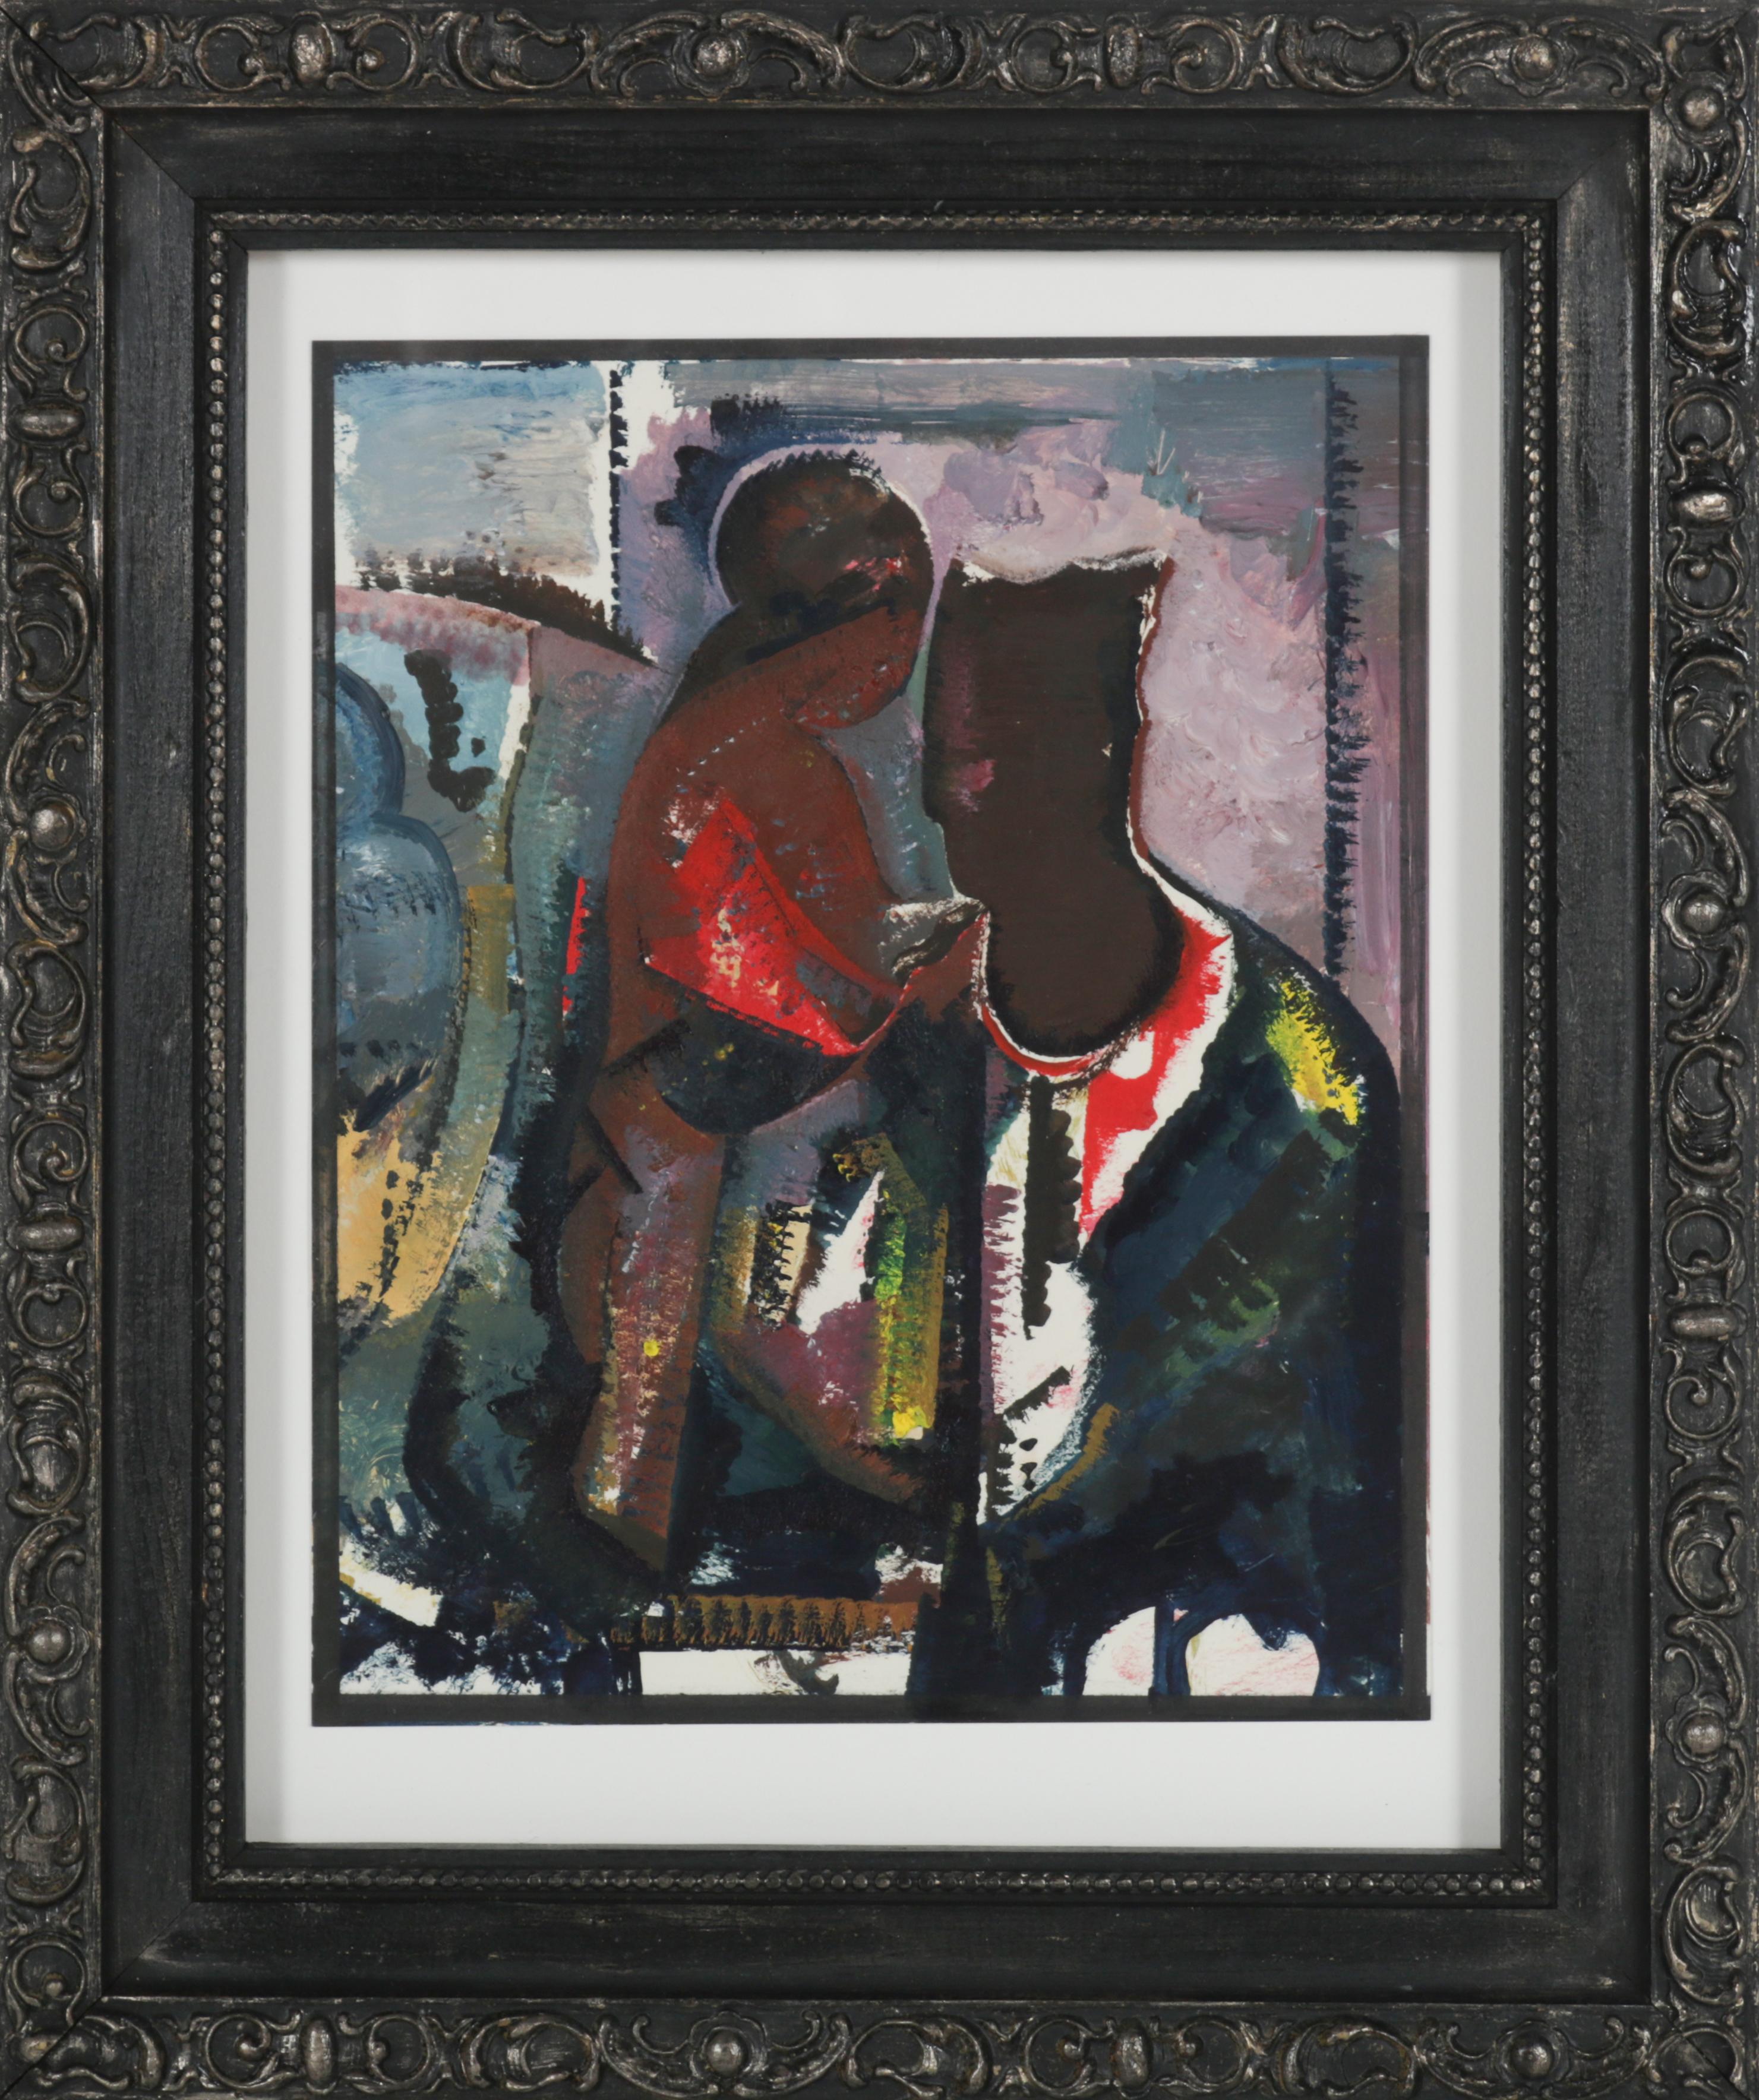 Schuyler Standish Figurative Painting - Abstracted Portrait of a Couple Late 20th Century Oil on Paper